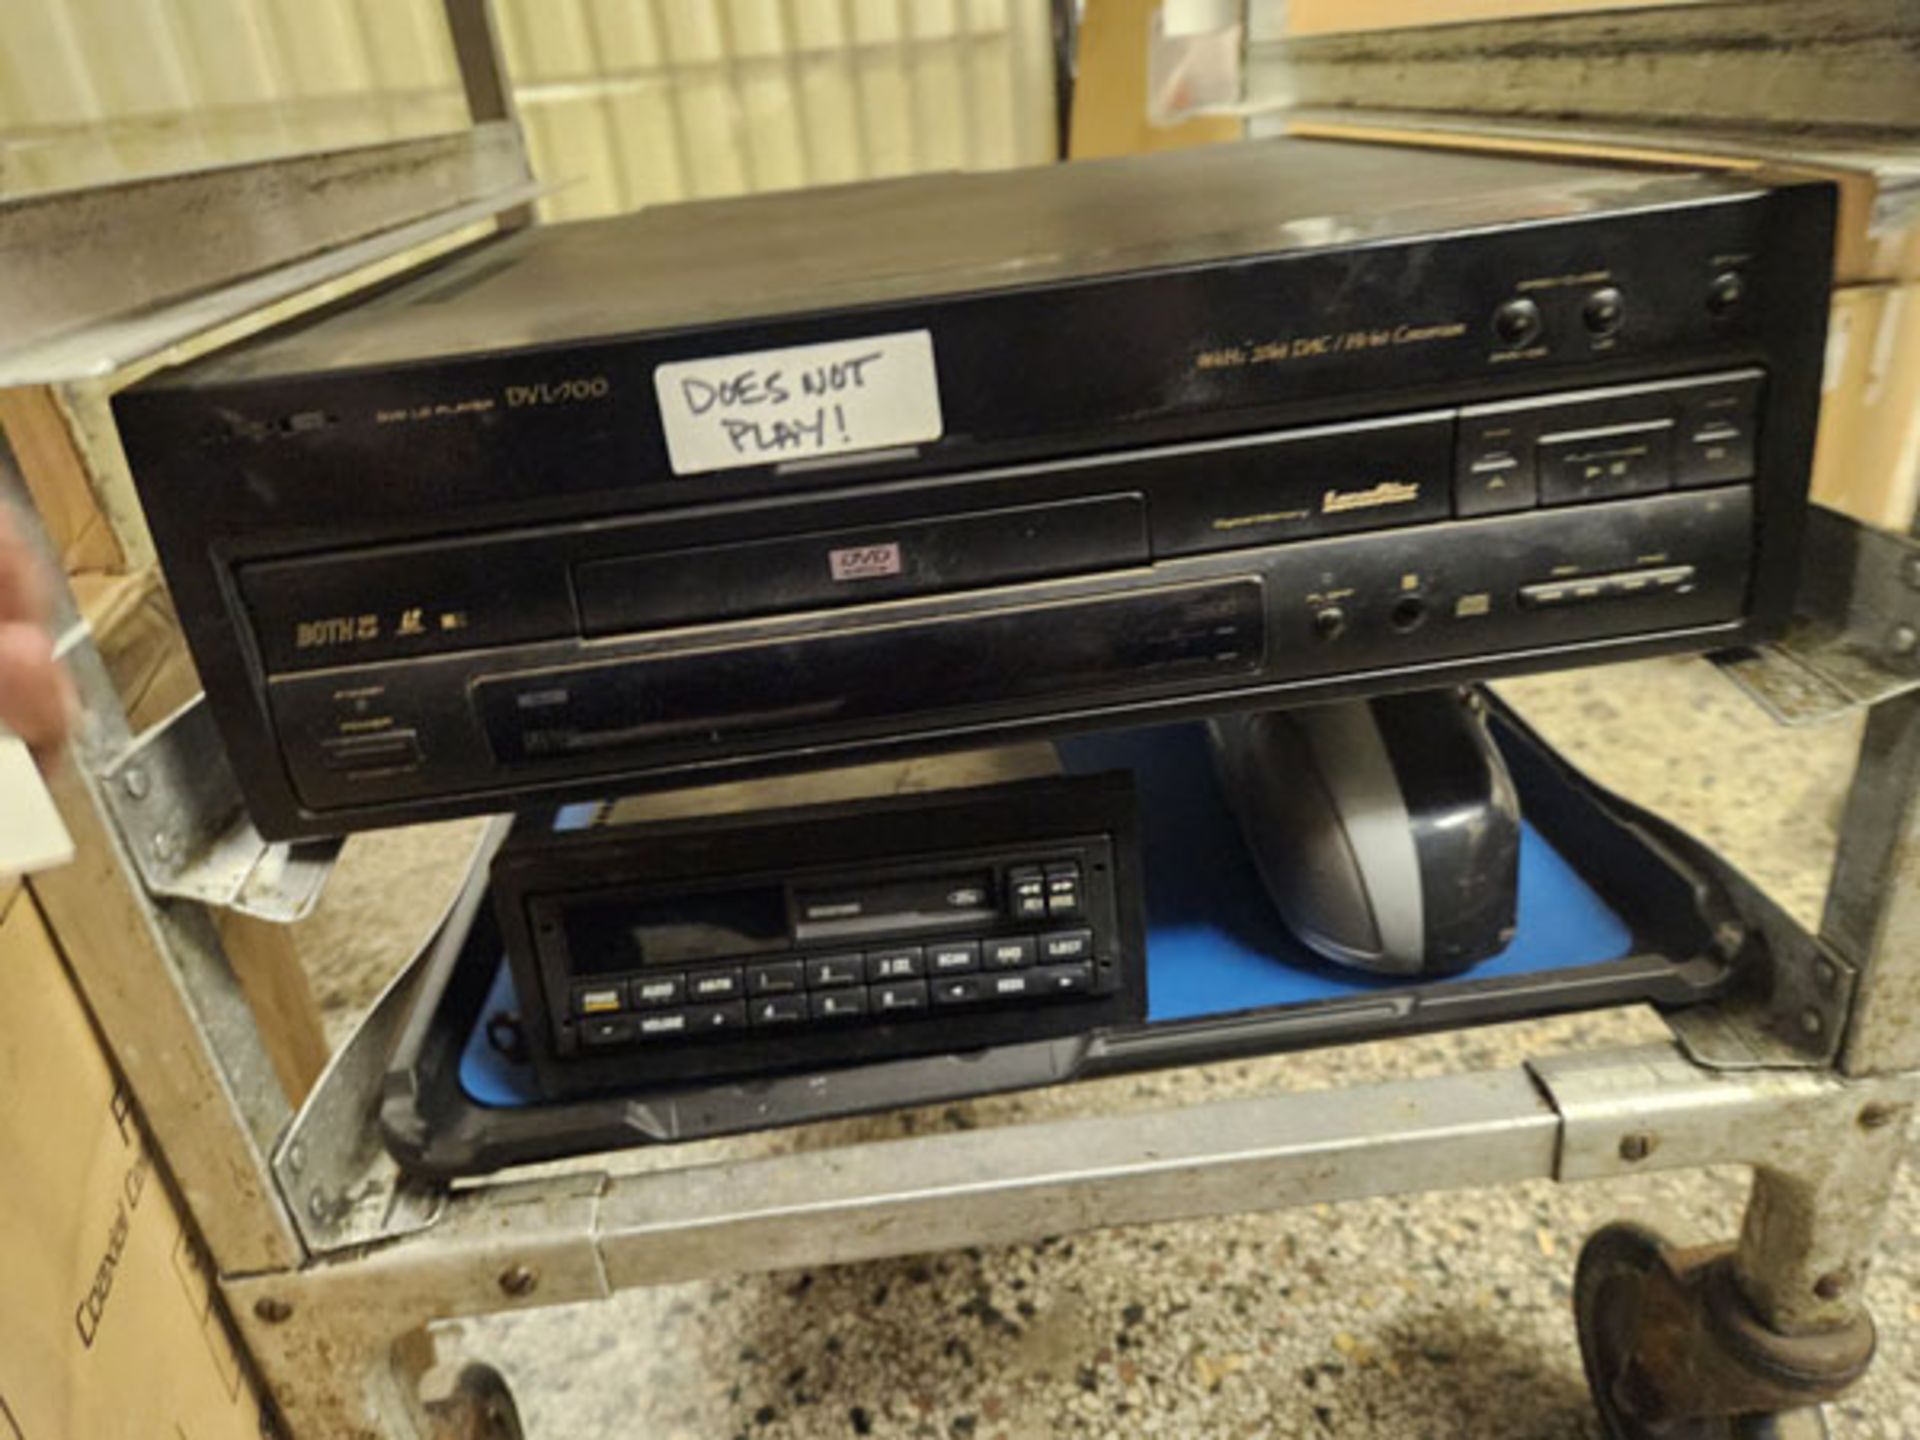 LOT OF 3 ASSORTED ELECTRONICS - DVD PLAYER(HAS A STICKER THAT SAYS DOES NOT PLAY), CAR STEREO CASSET